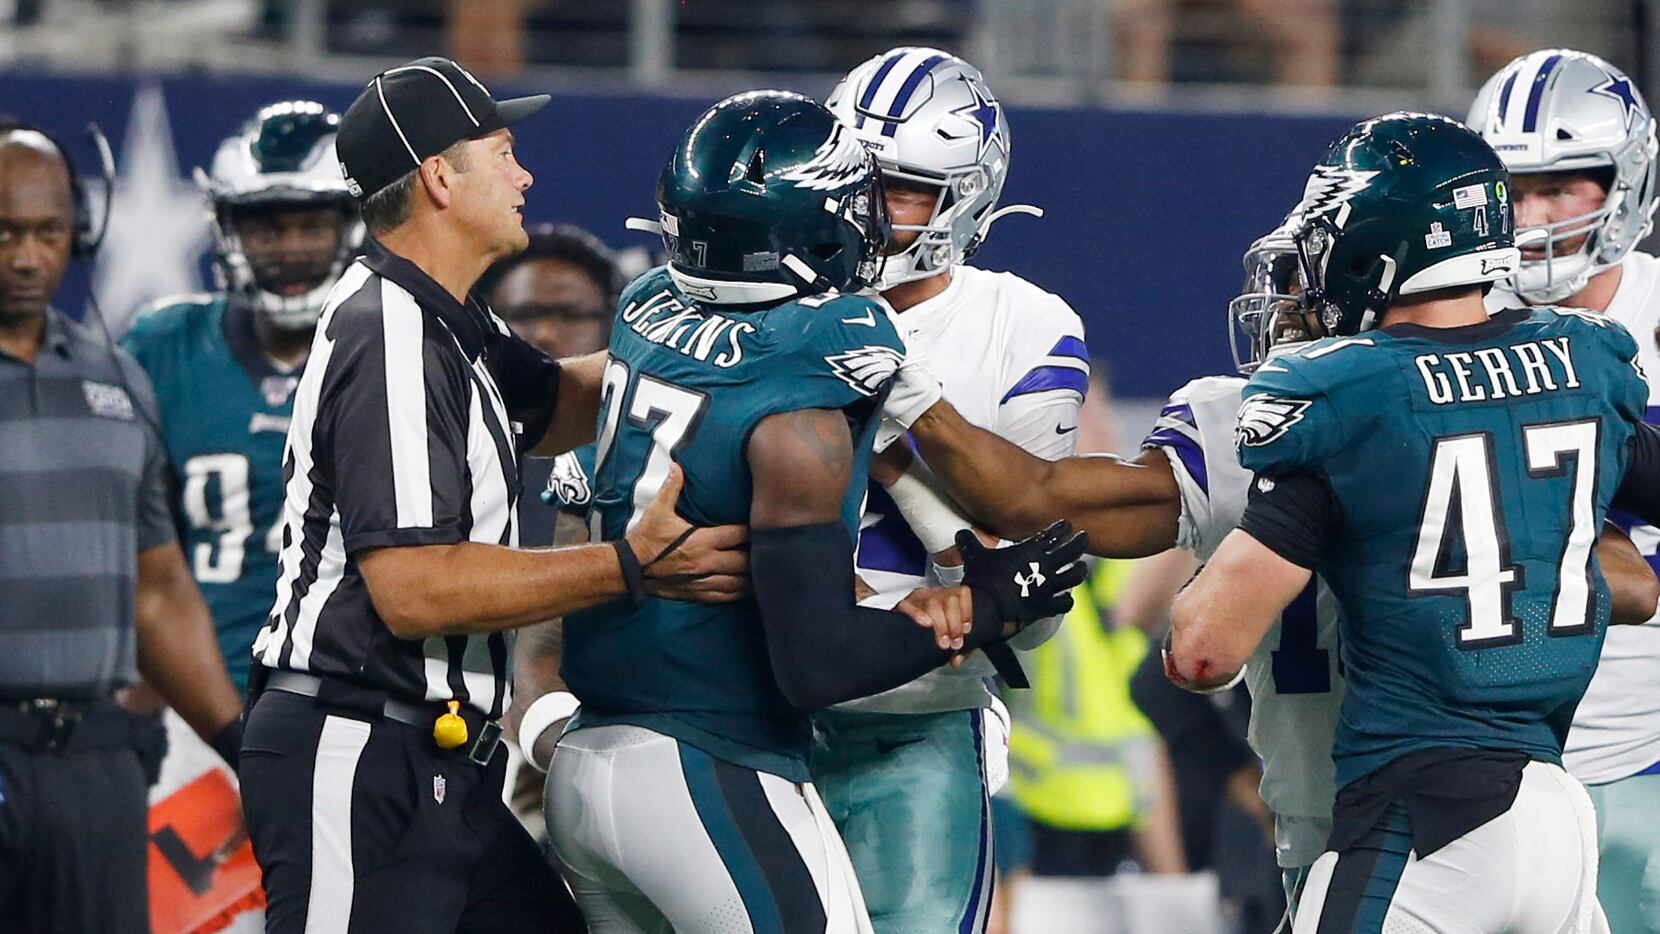 NFL playoffs: Eagles scenarios, Cowboys, 49ers in hunt, NFC East